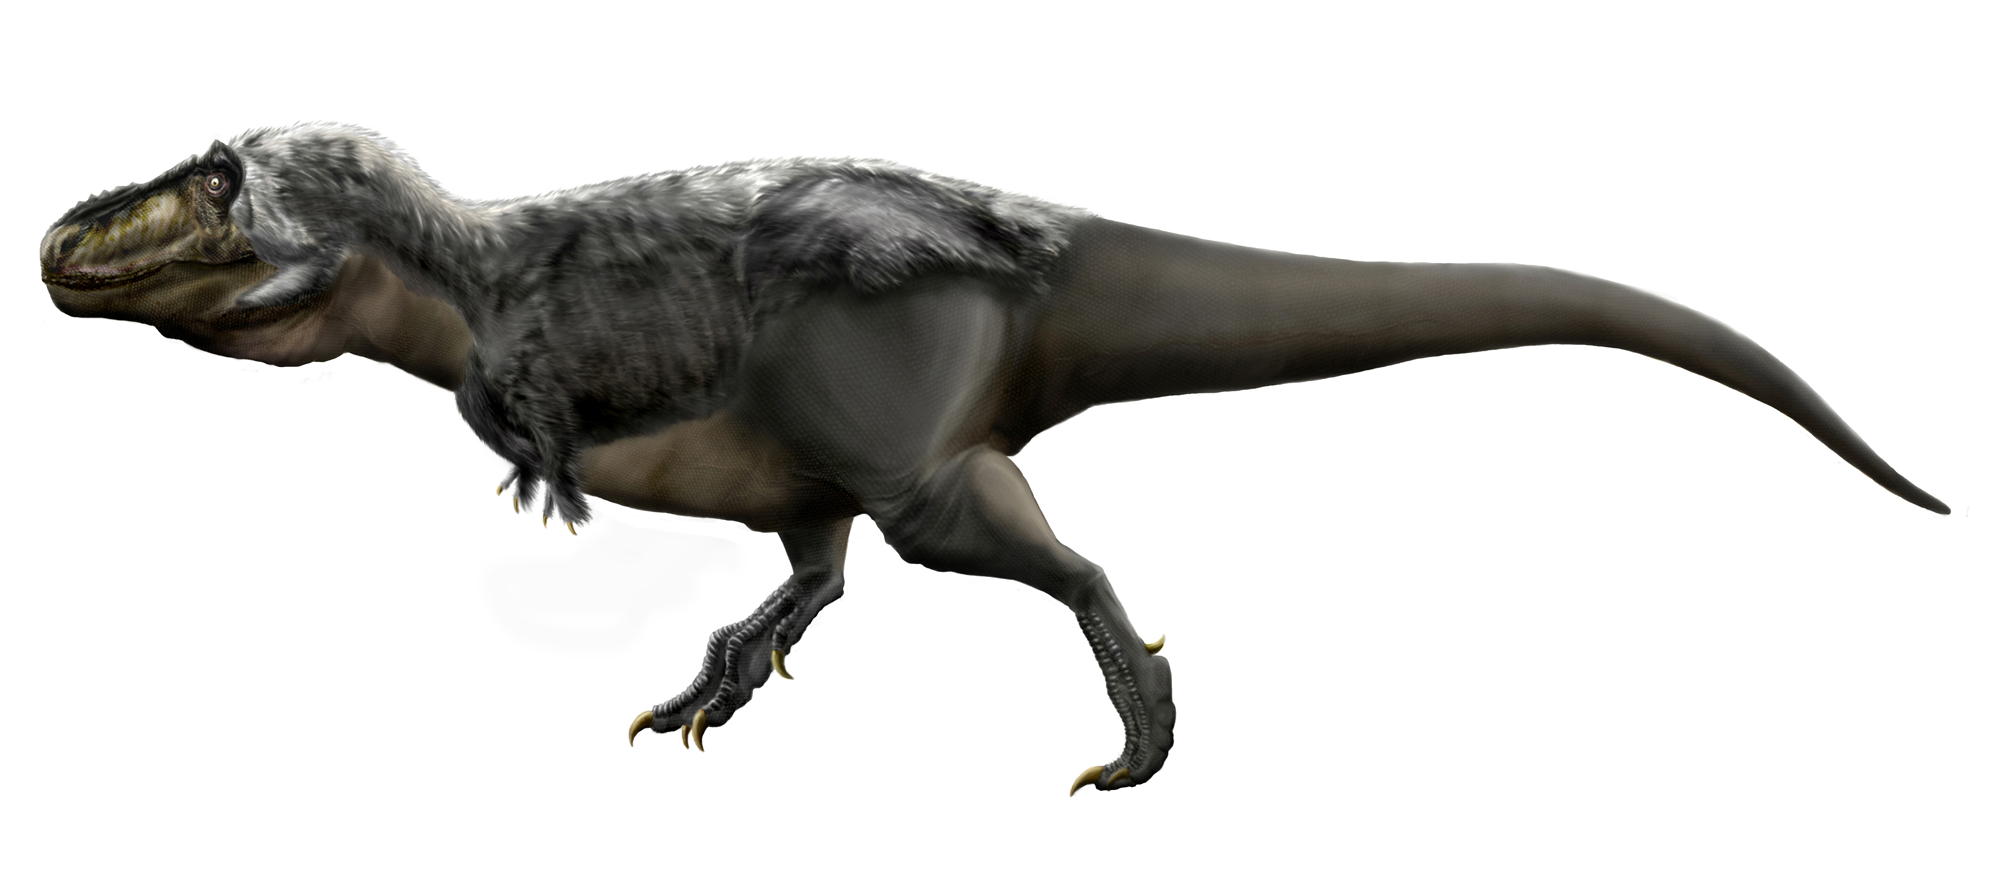 Newly discovered dinosaur had tiny arms like T. rex